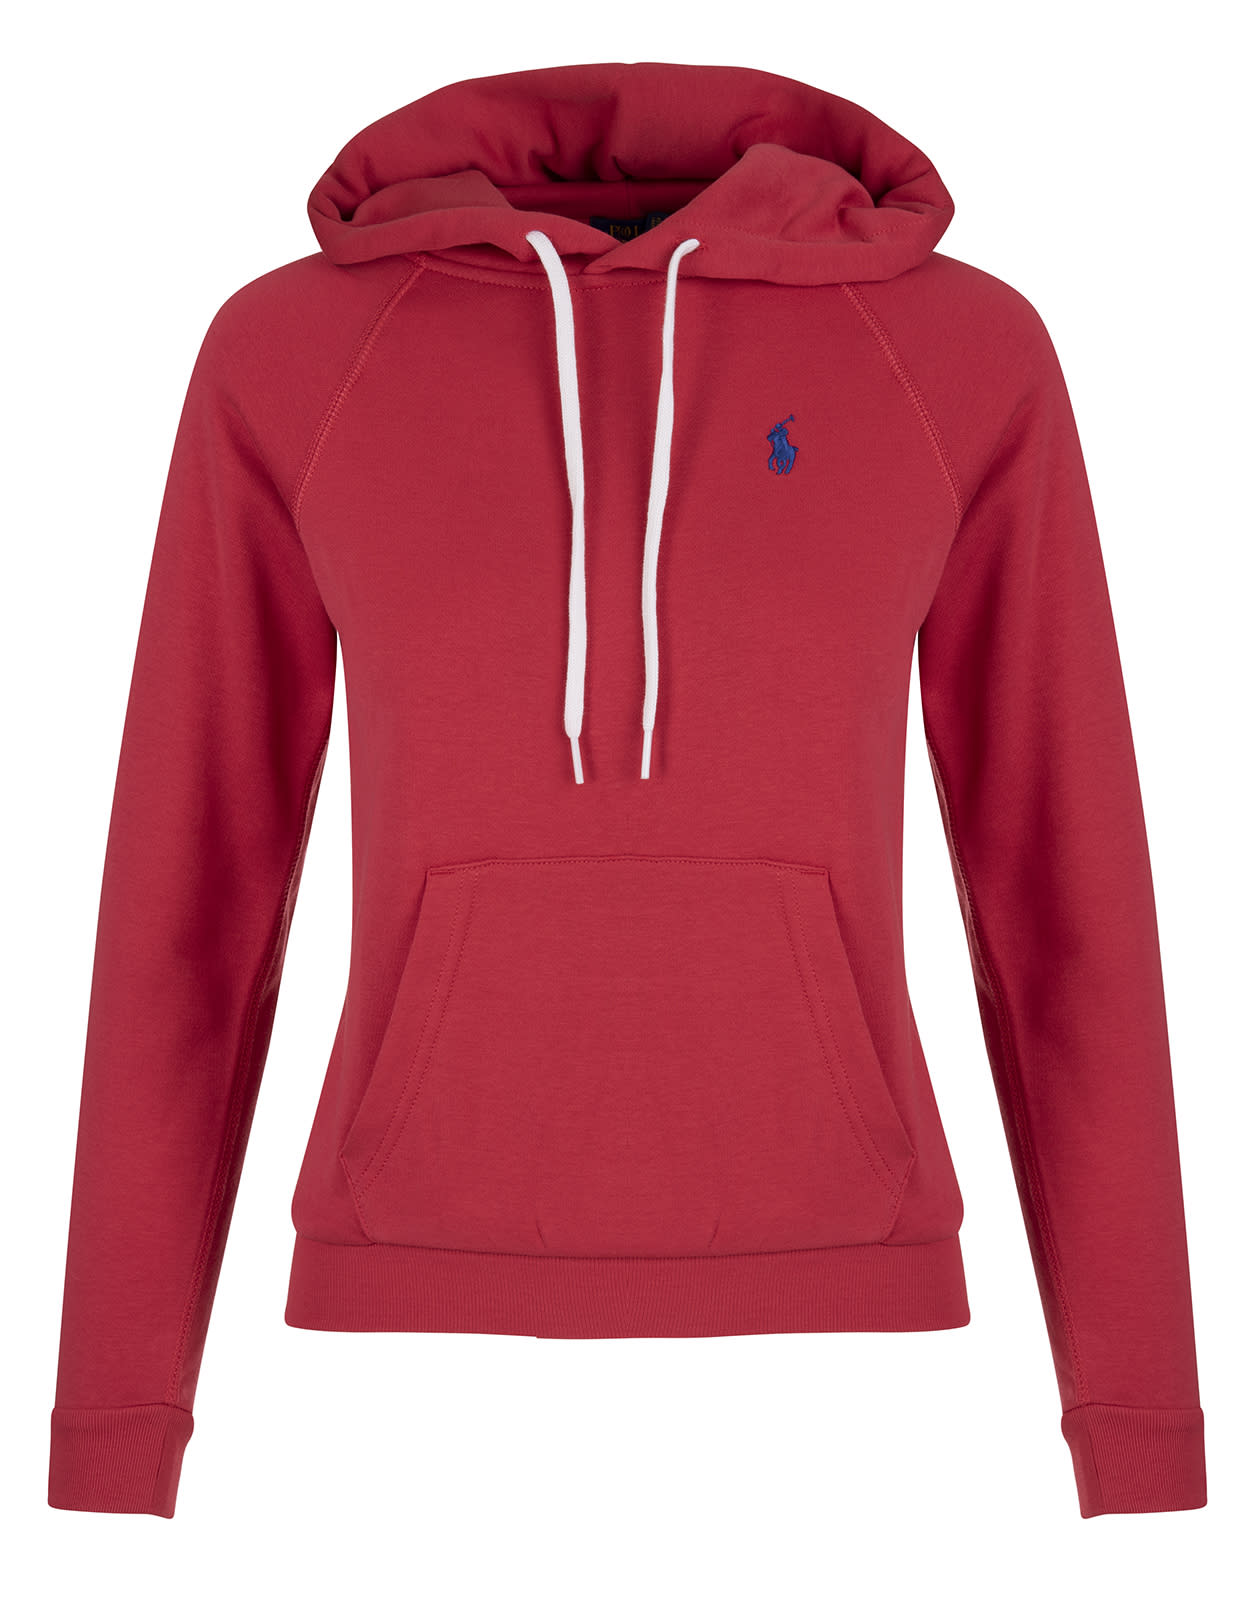 Ralph Lauren Woman Hoodie In Red Cotton With White Pony